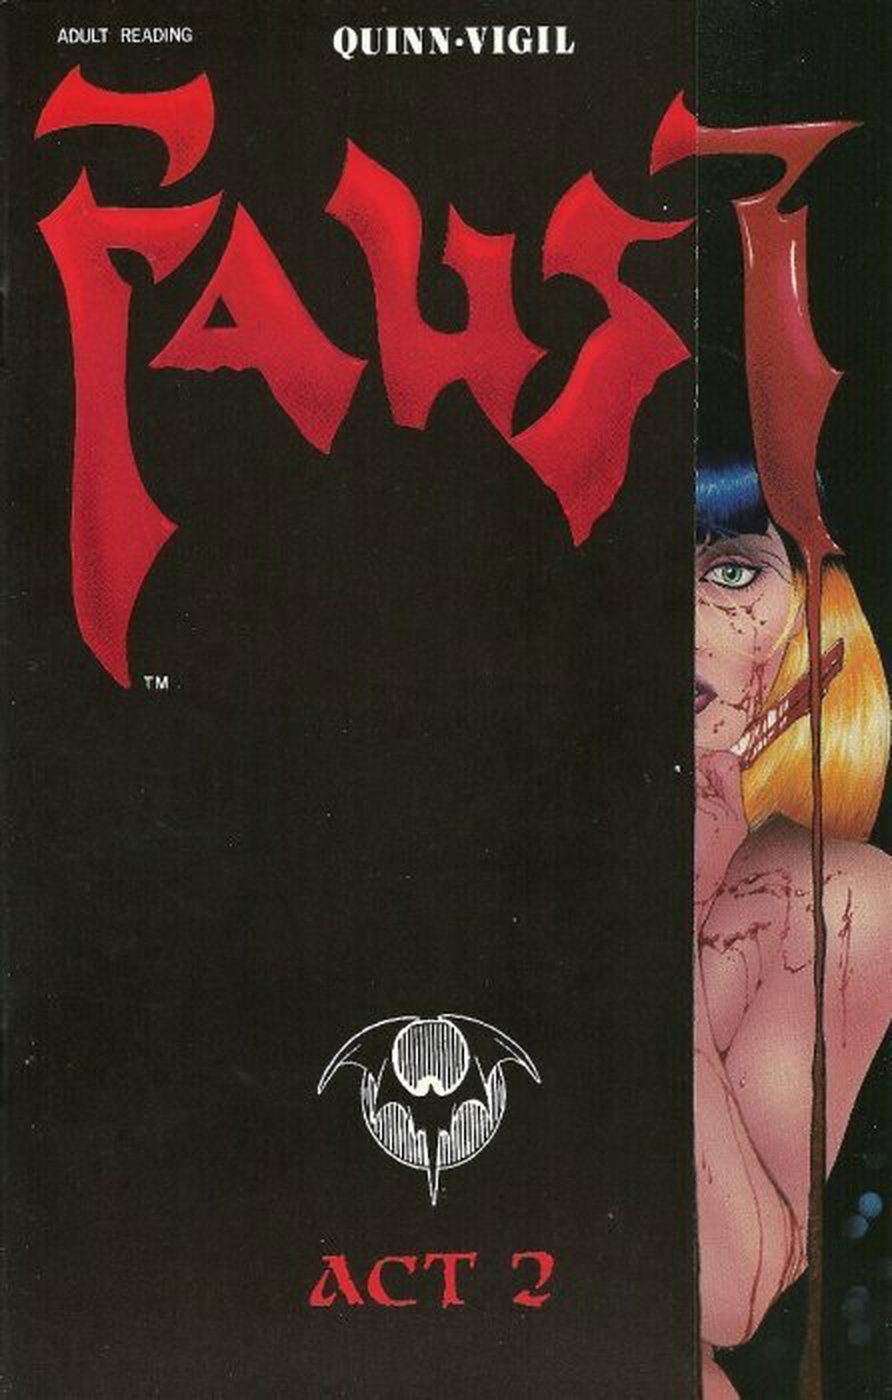 Faust #2